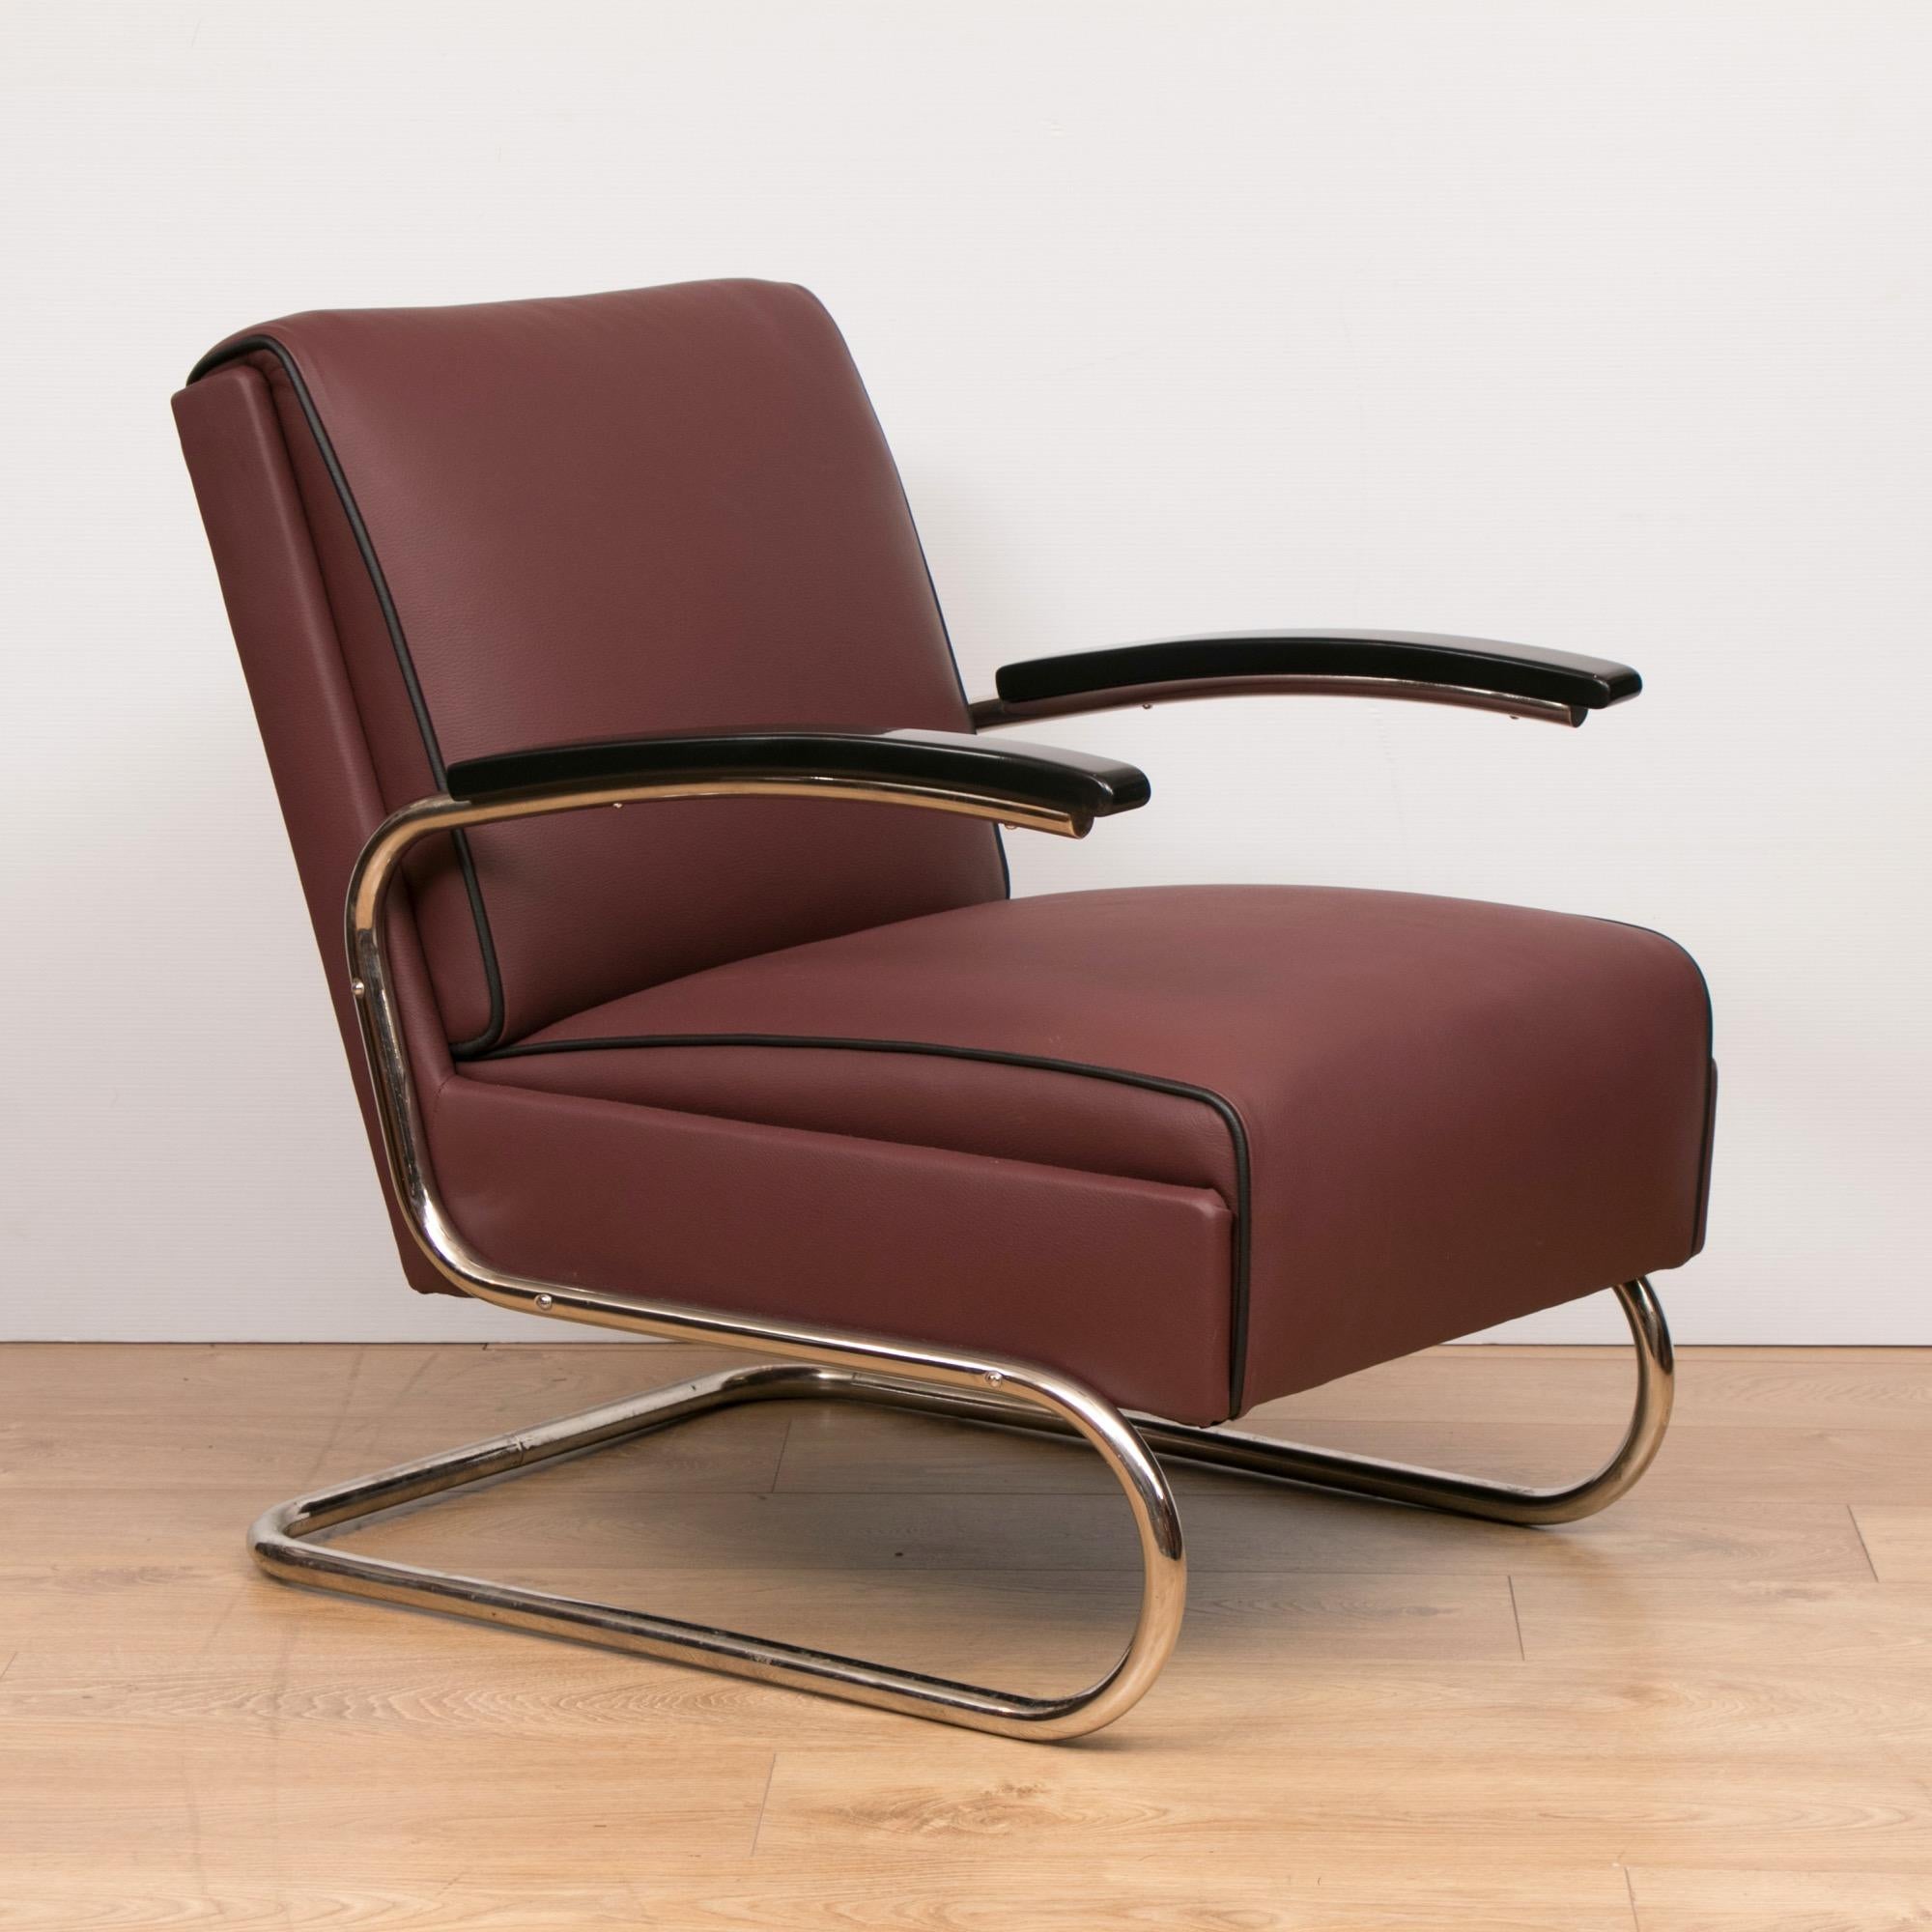 A pair of Thonet Art Deco armchairs Bauhaus design with polished cantilever frames and newly upholstered in a burgundy Connolly leather.
The wooden arm tops have been re finished in a black lacquer.
designed by Willem Hendrik Gispen – Manufactured